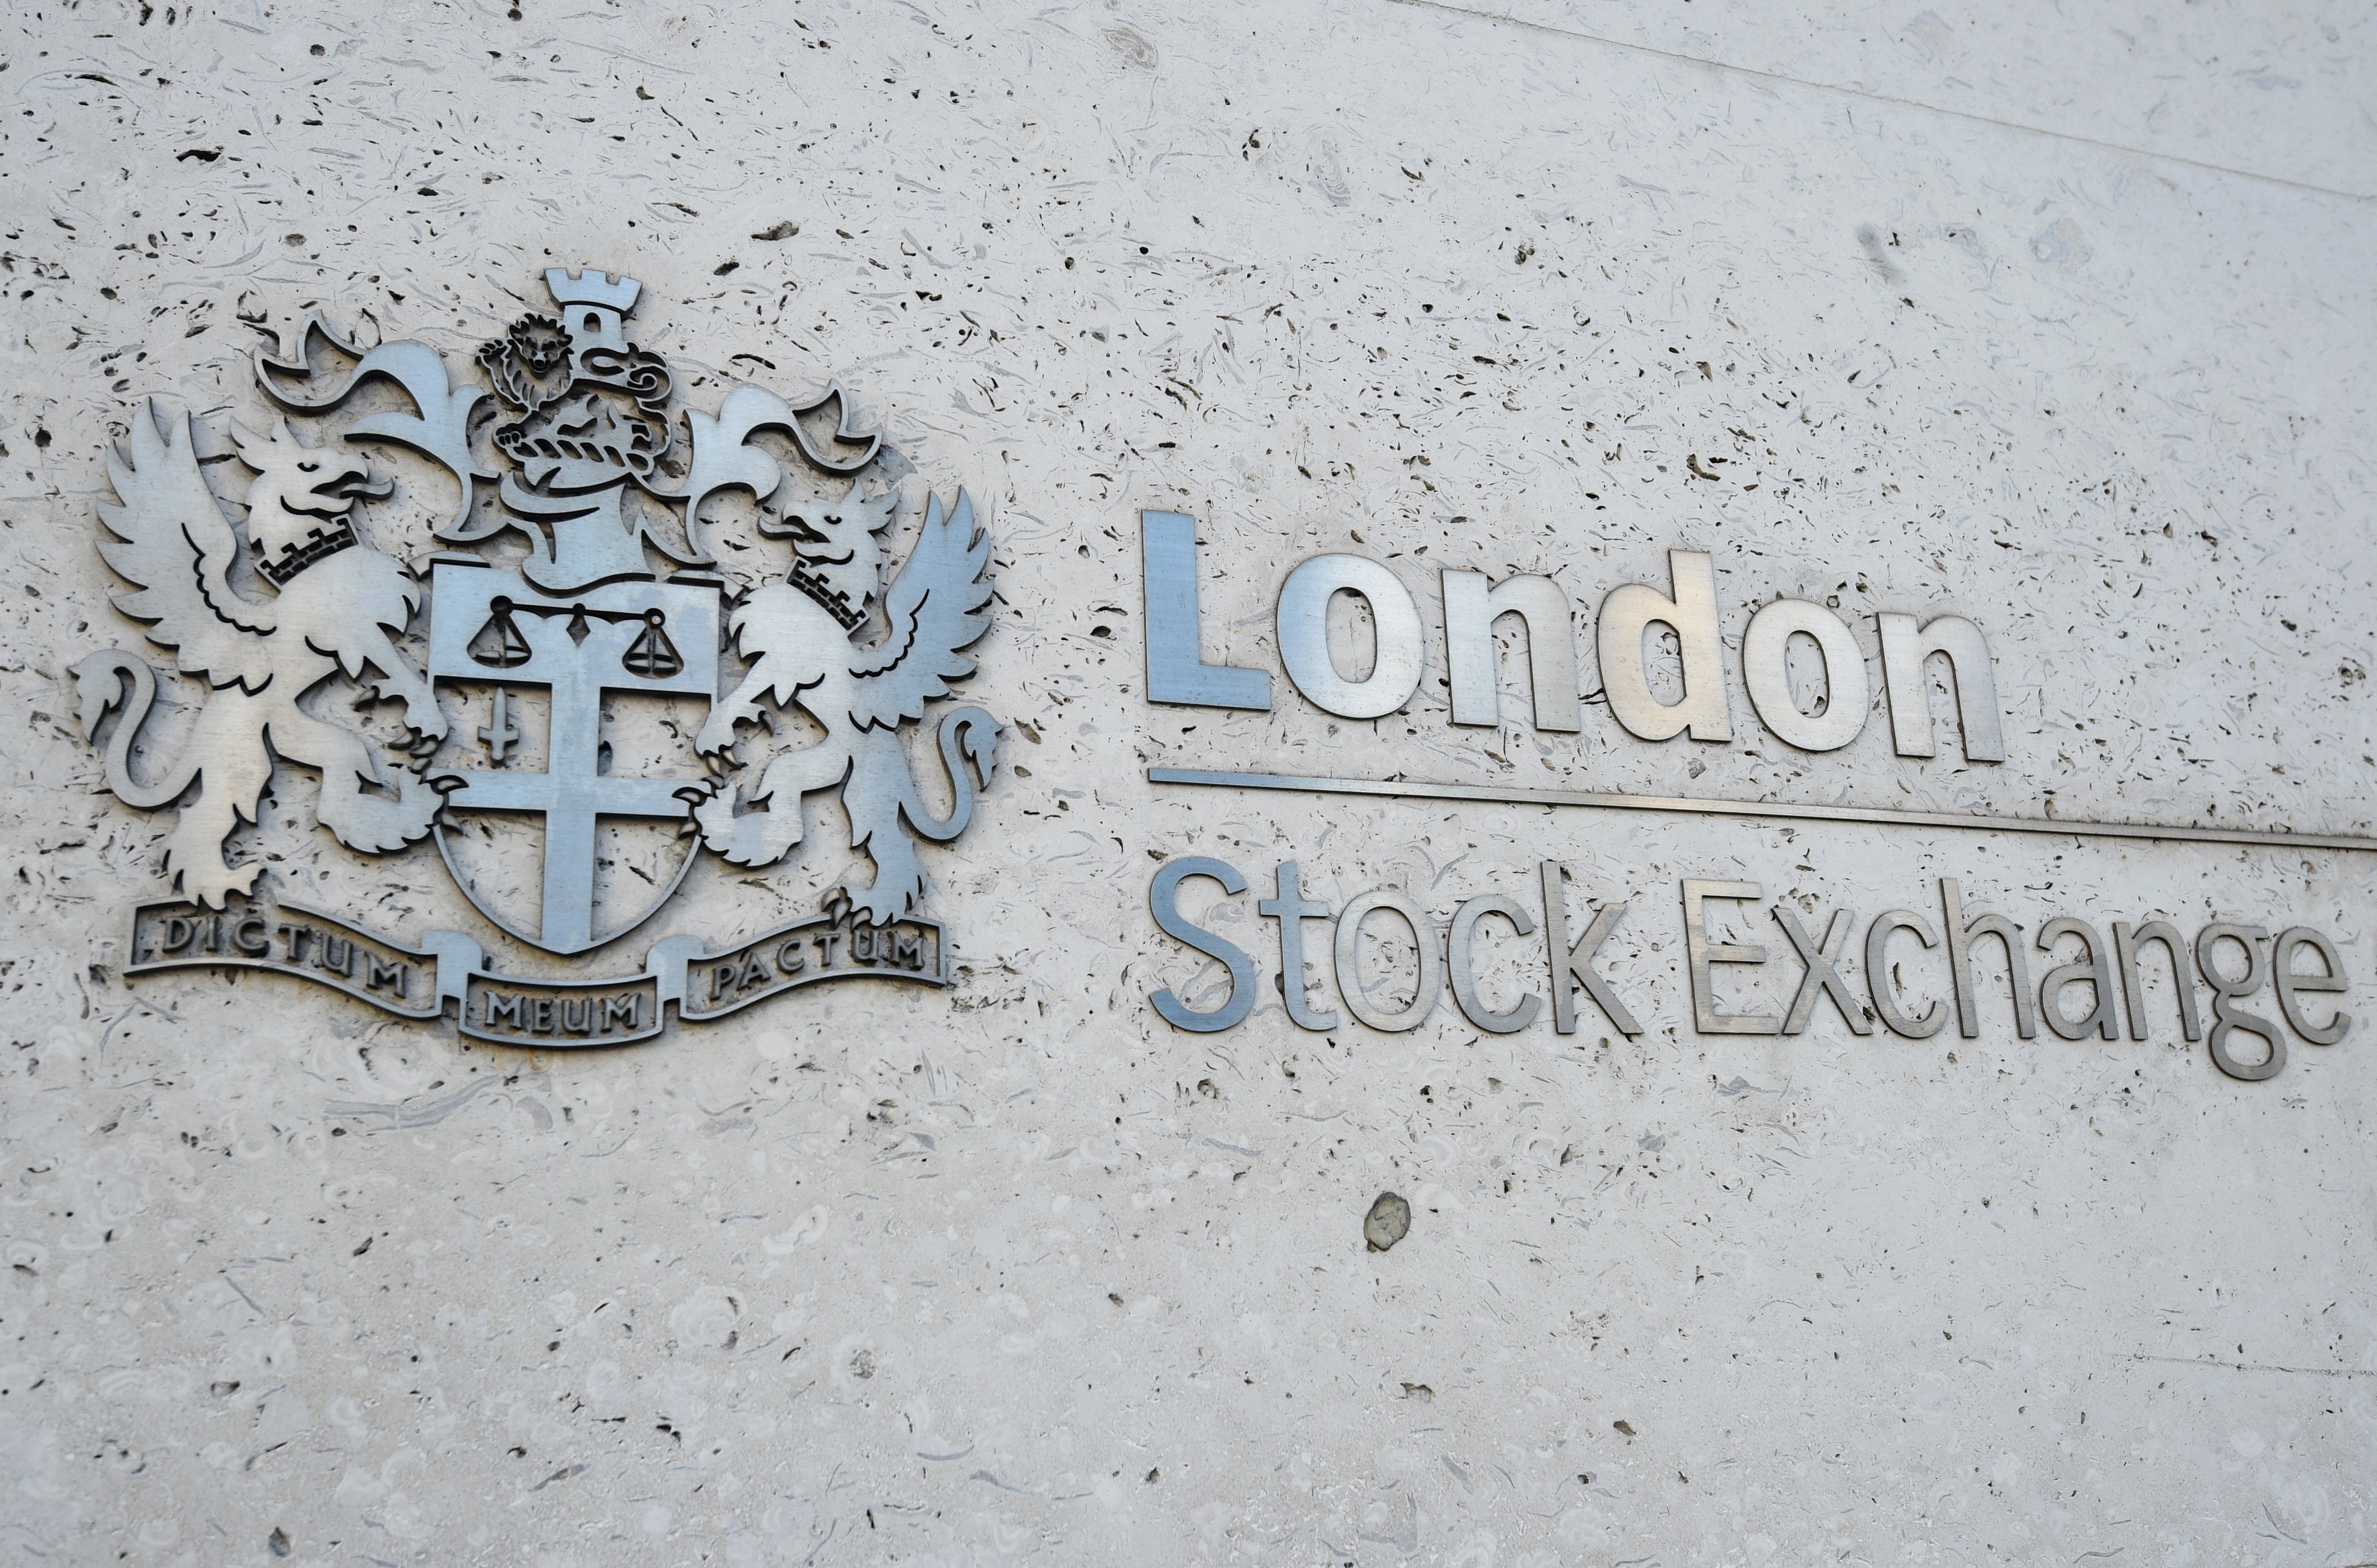 The FTSE 100 slumped lower on Tuesday (Kirsty O’Connor/PA)